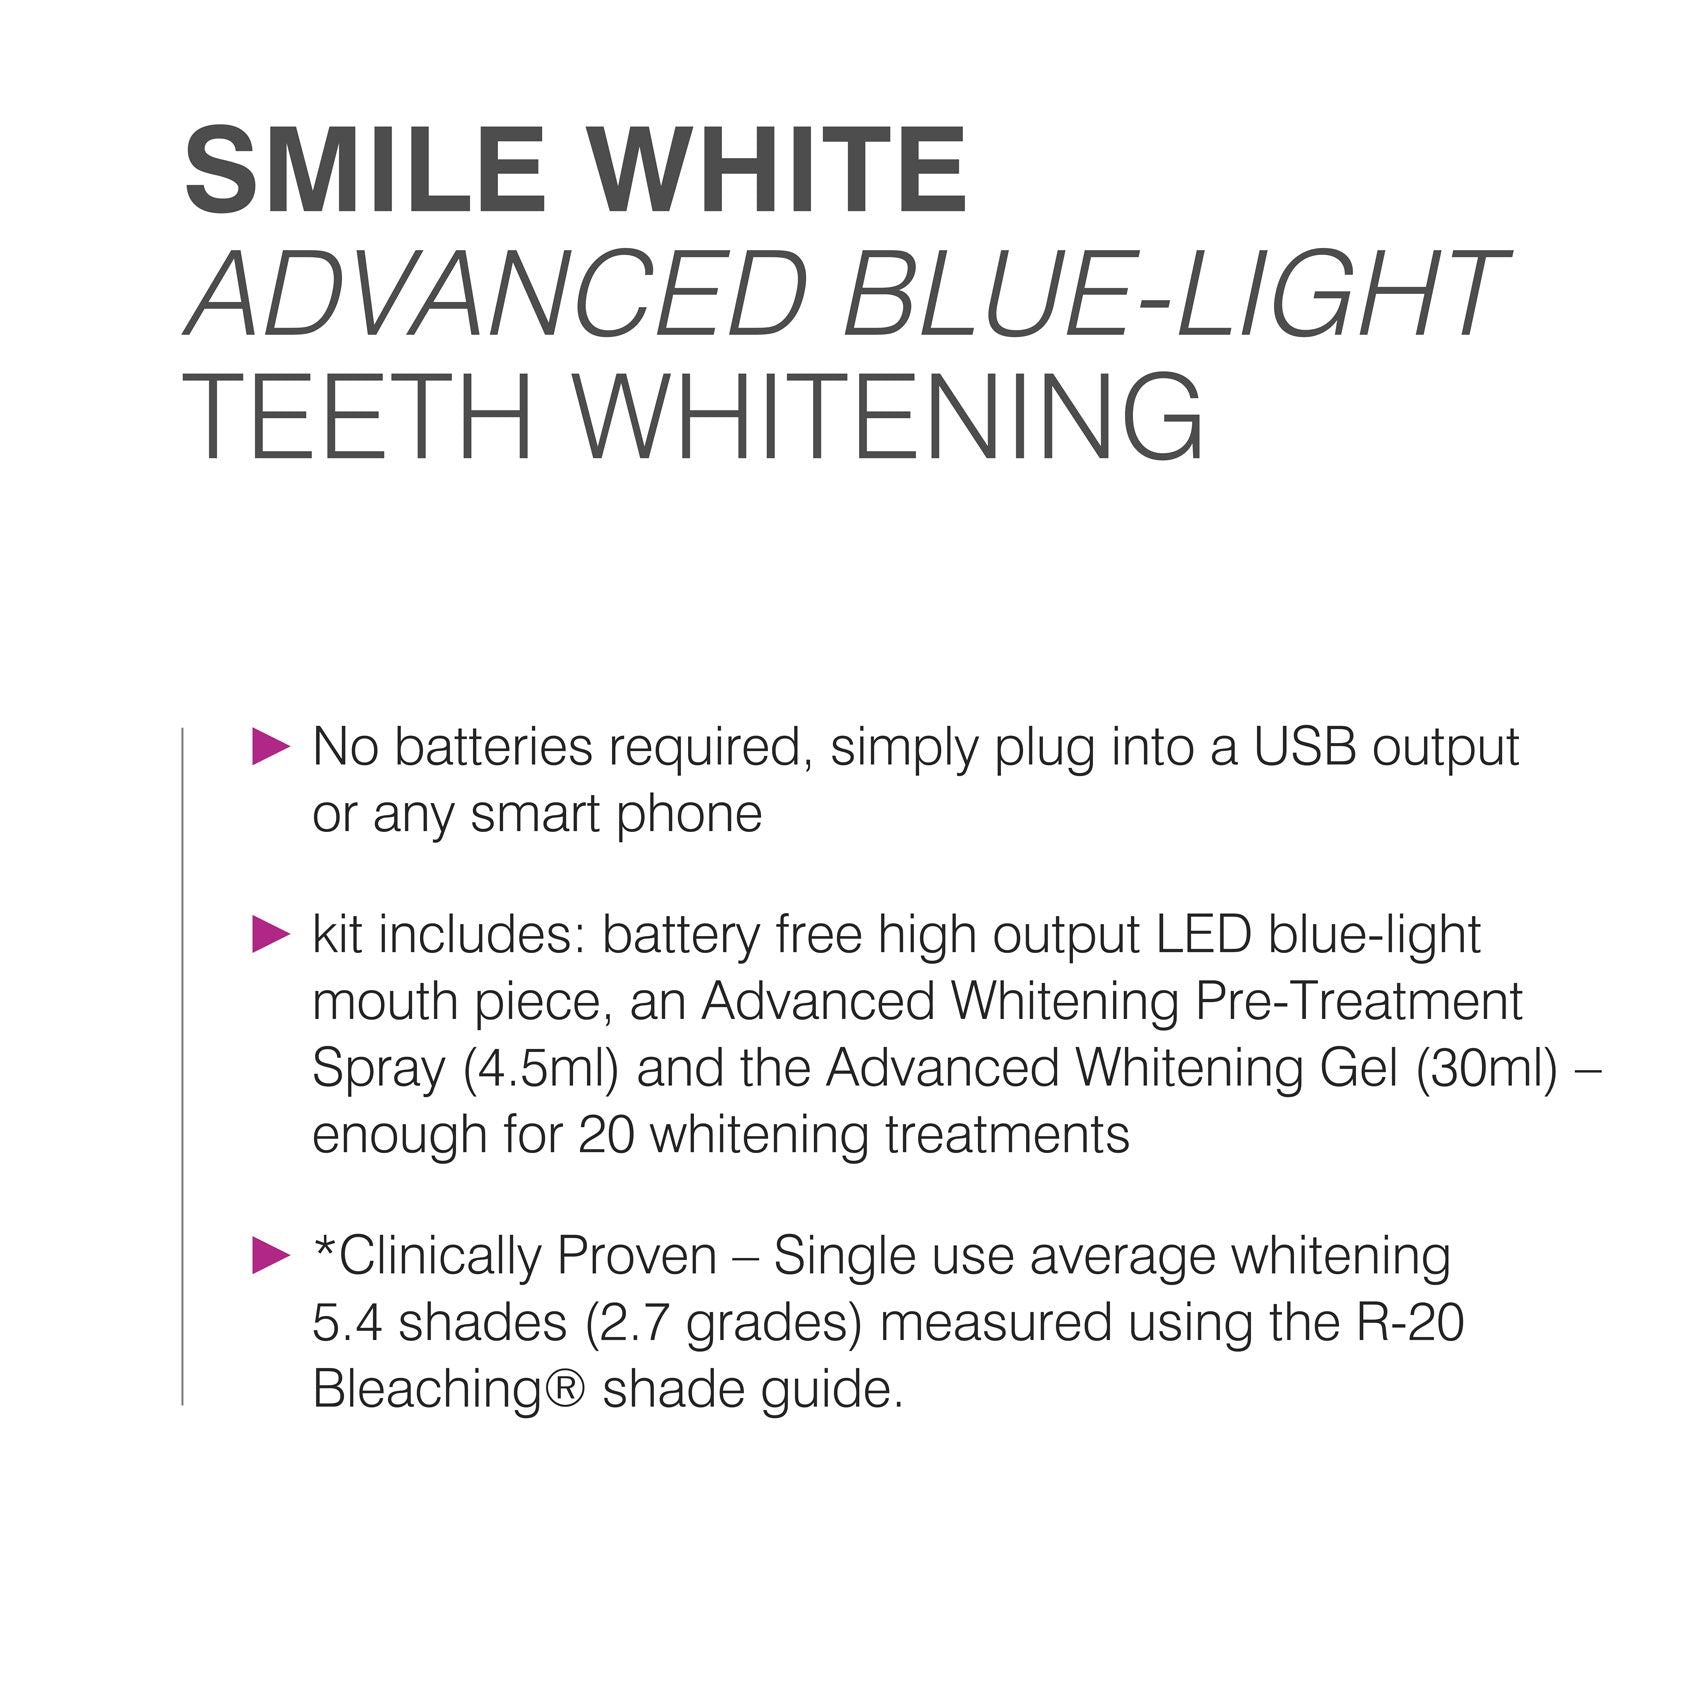 list of features: no batteries required, simply plug into a USB output or any smart phone, kit includes: battery free high output LED blue-light mouth piece, an advanced whitening pre-treatment spray (4.5ml) and the advanced whitening gel (30ml) enough for 20 whitening treatments, clinically proven - single use average whitening 5.4 shades (2.7 grades) measured using the R-20 bleaching shade guide